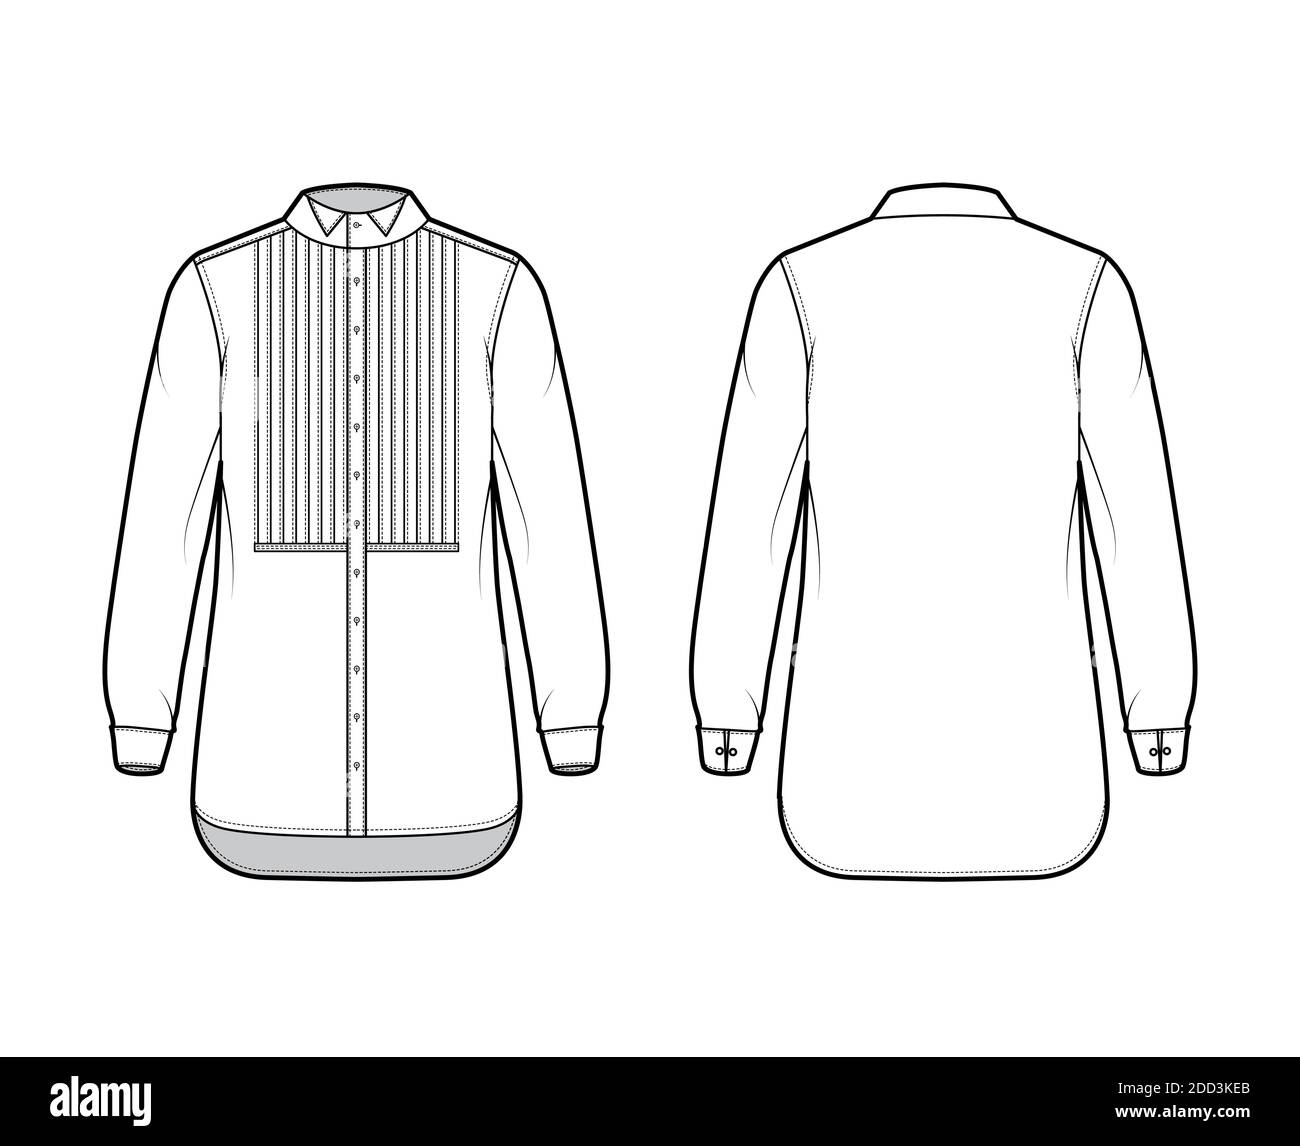 Shirt tuxedo dress technical fashion illustration with pleated pintuck bib, long sleeve with french cuff, wing collar, relax fit. Flat template front back white color. Women men unisex top CAD mockup Stock Vector